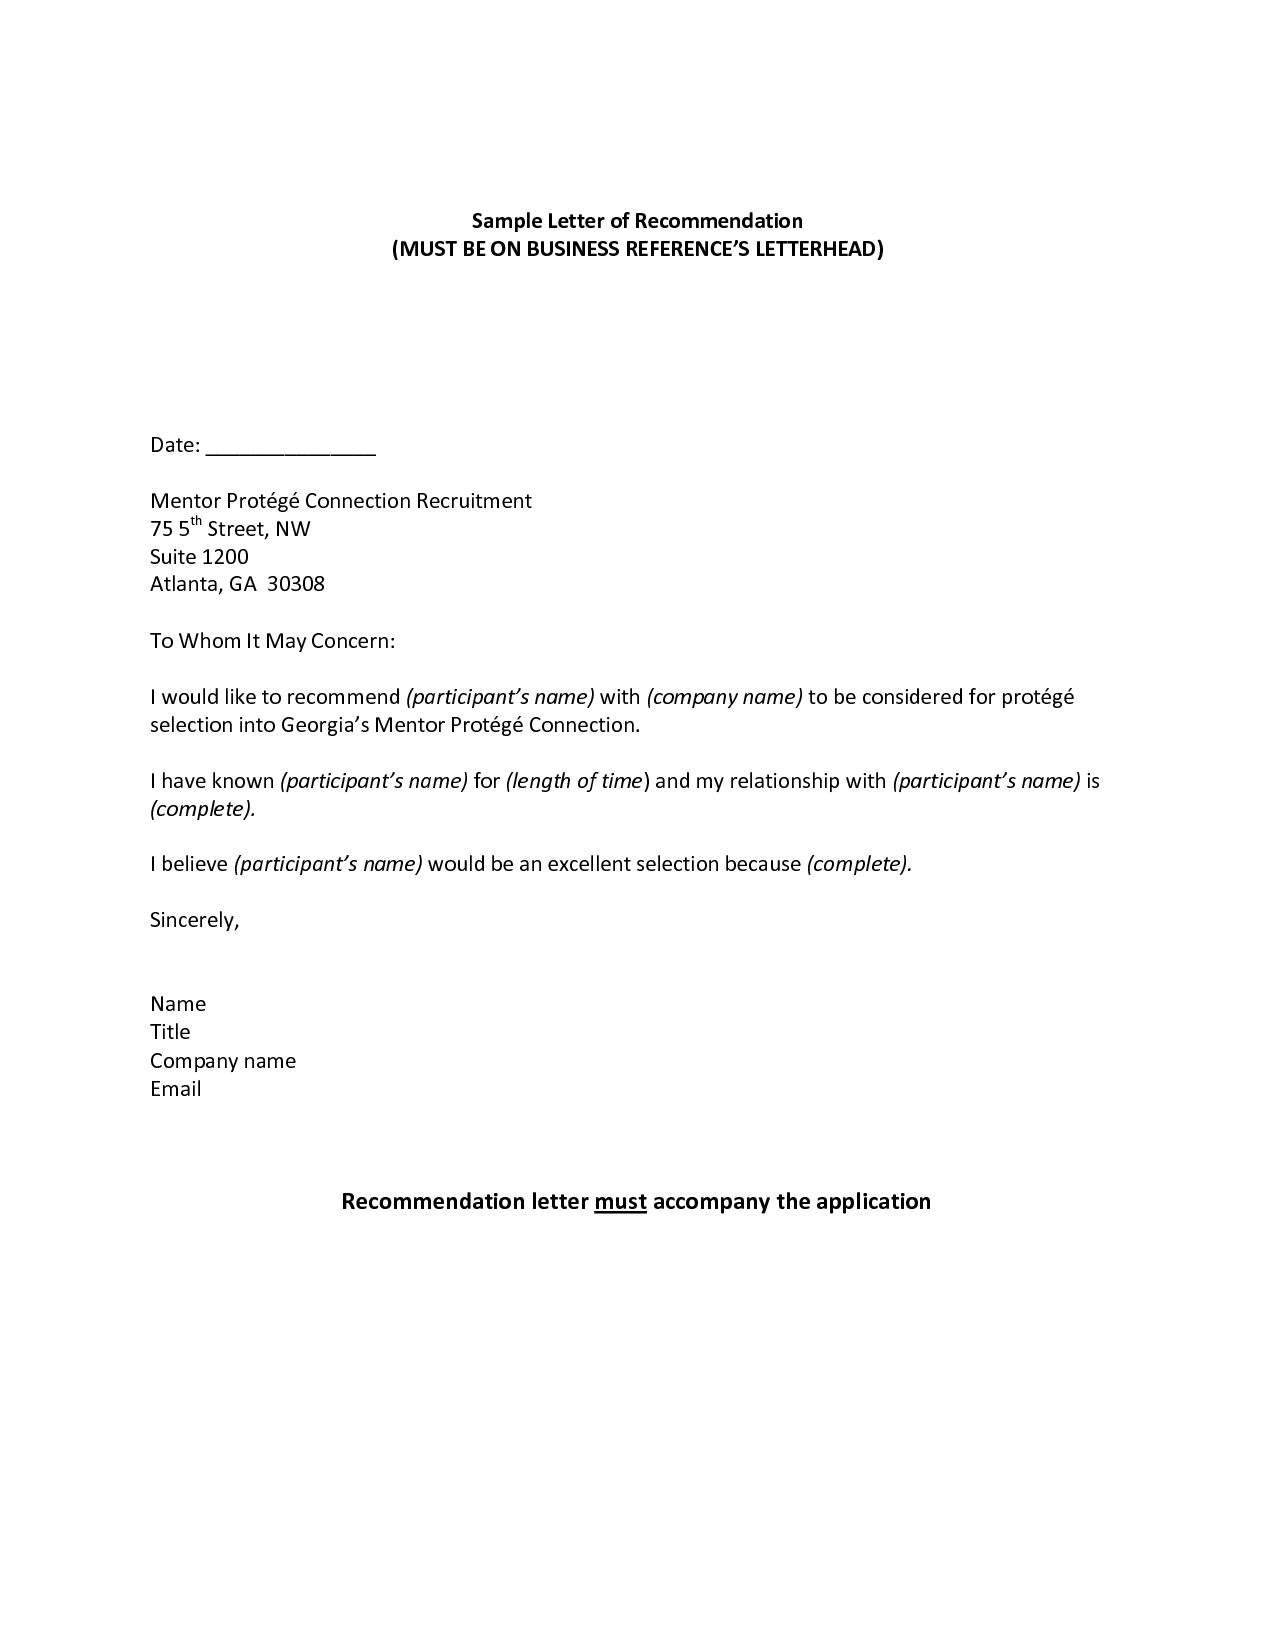 Professional Reference Sample Recommendation Letter Jos for dimensions 1275 X 1650